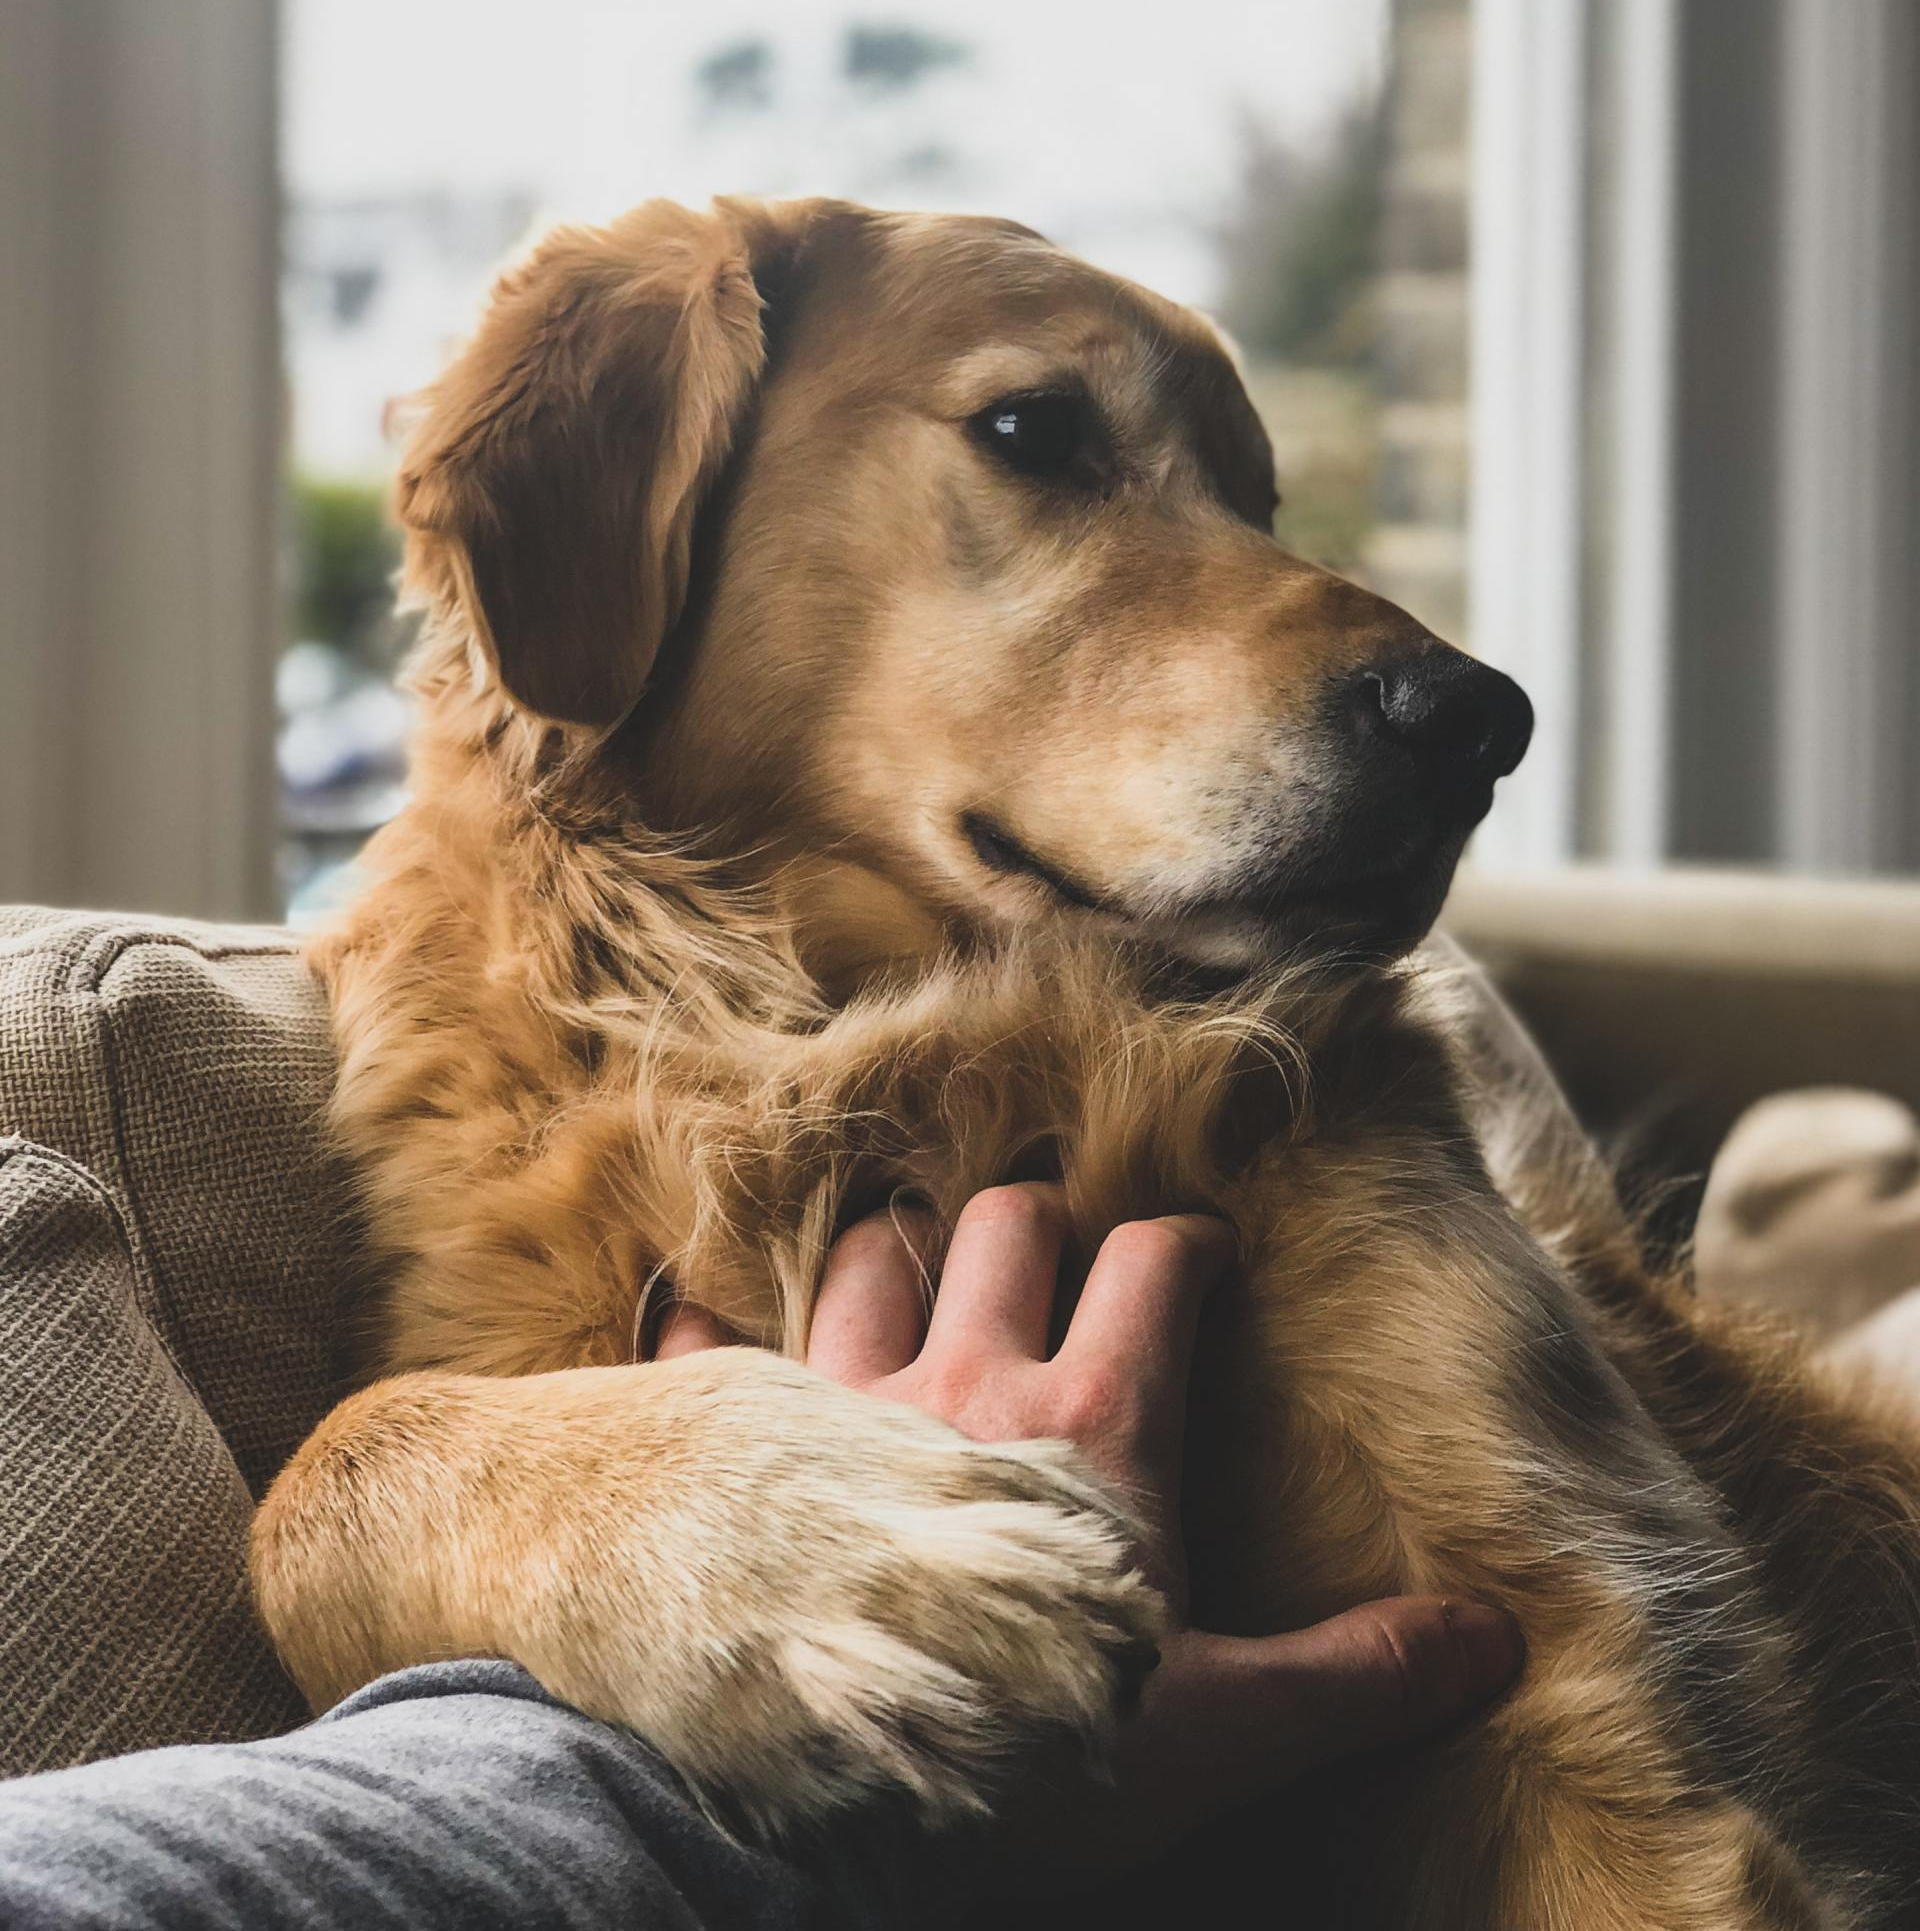 How To Help Your Dog Feel Secure When Home Alone